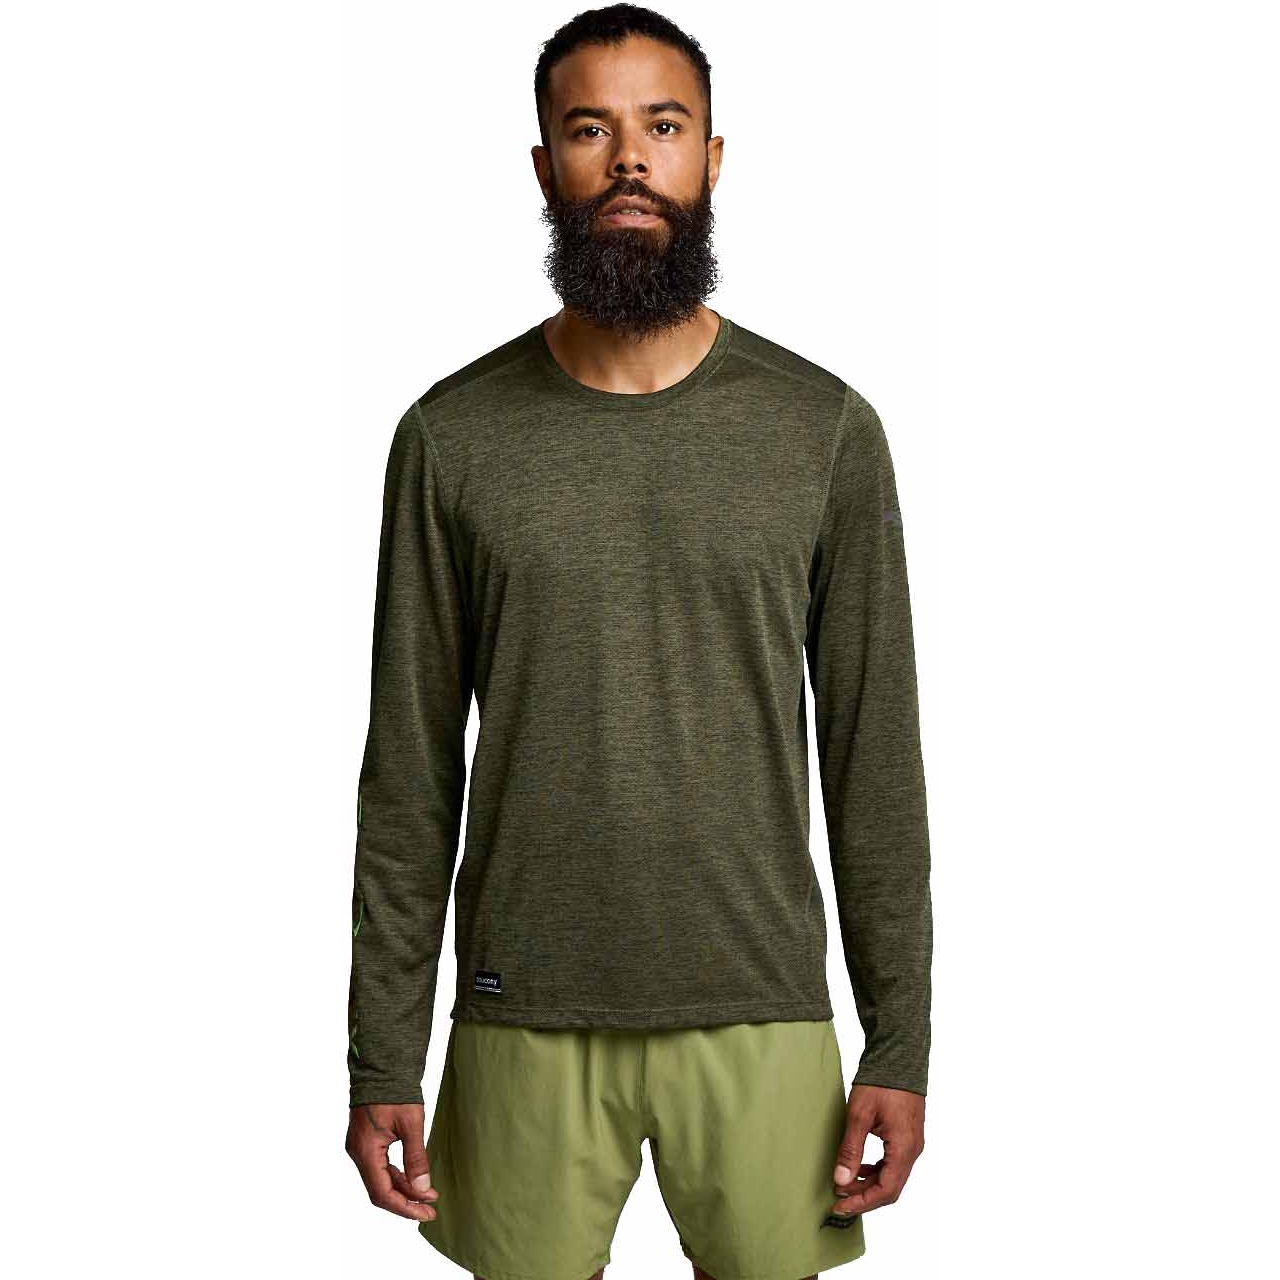 Saucony Stopwatch Graphic Long Sleeve Shirt - umbra heather graphic ...